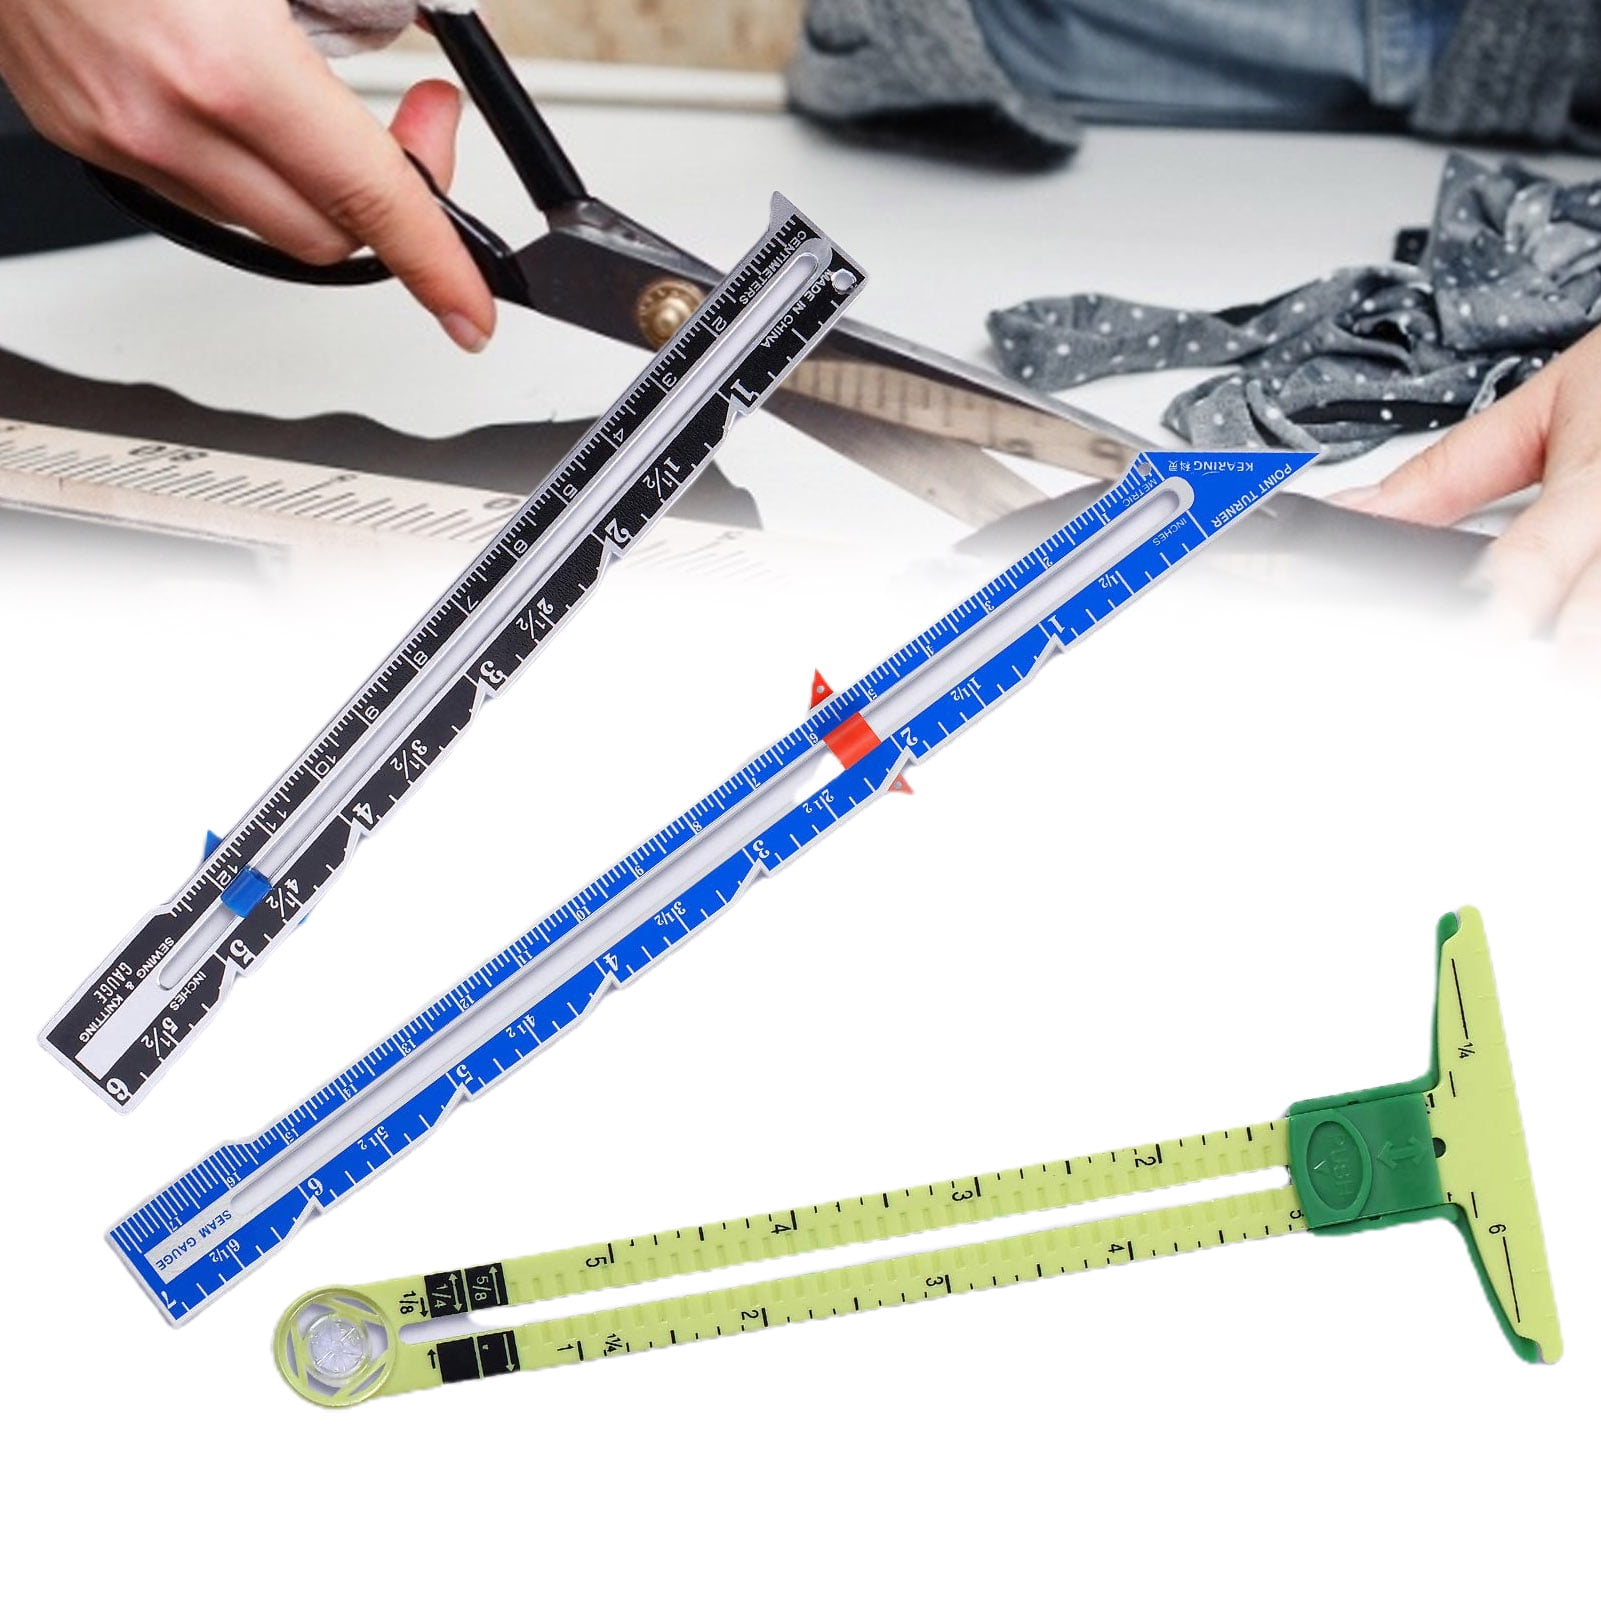 JeashCHAT 2 Pcs Sewing Gauge Clearance, 5-in-1 Sliding Marker Measuring  Sewing Ruler Tool for Sewing,Crafting, Marking Button Holes - Sewing  Beginner